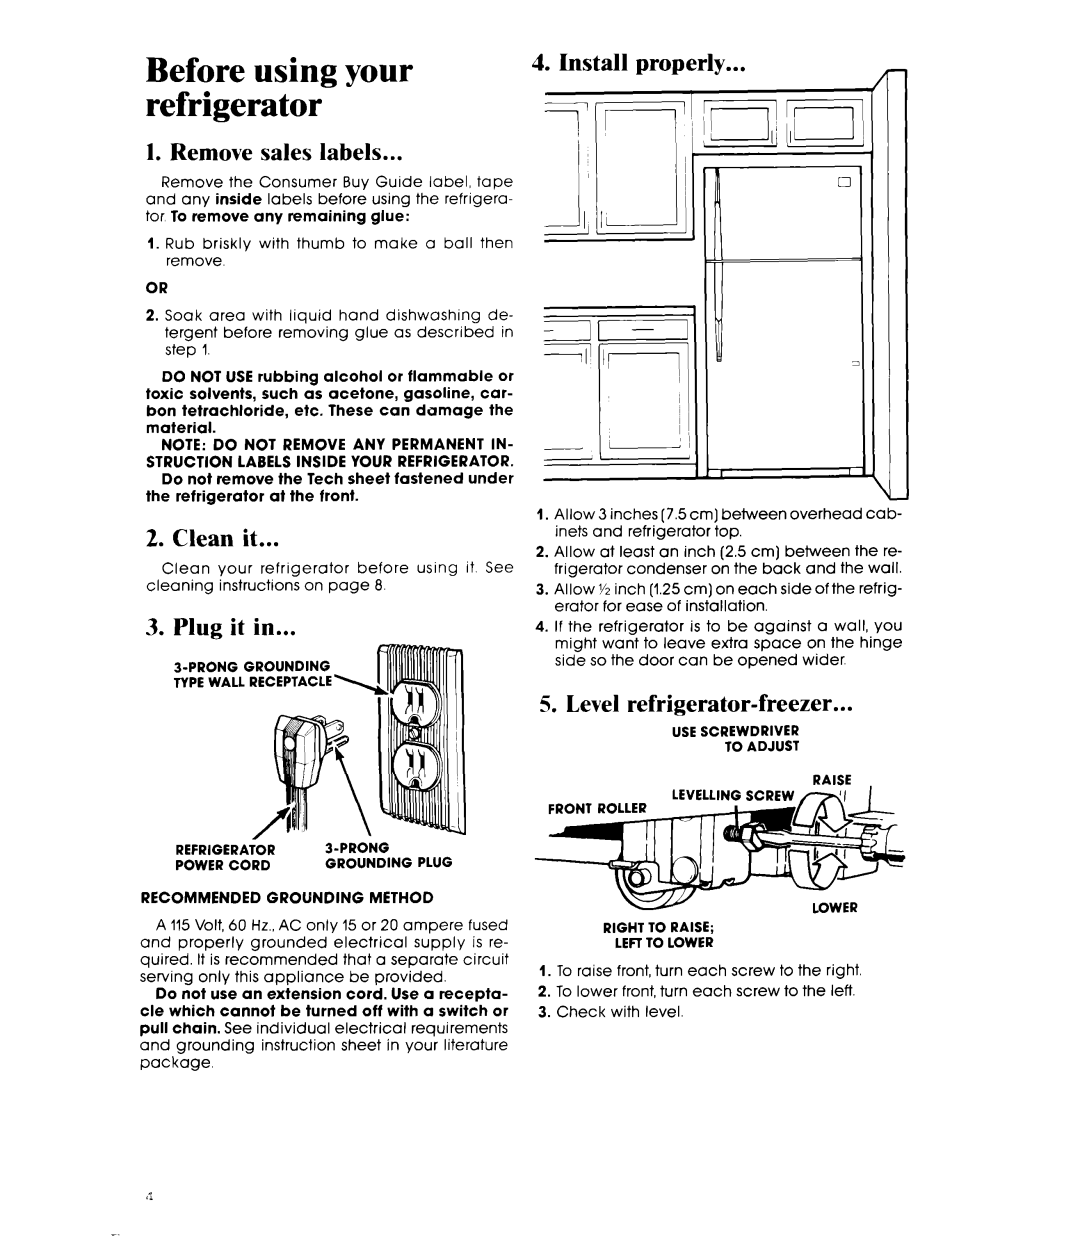 Whirlpool ET18HK, ETl8GK manual Before using your refrigerator, Remove sales labels, Clean it, Plug it in, Install properly 